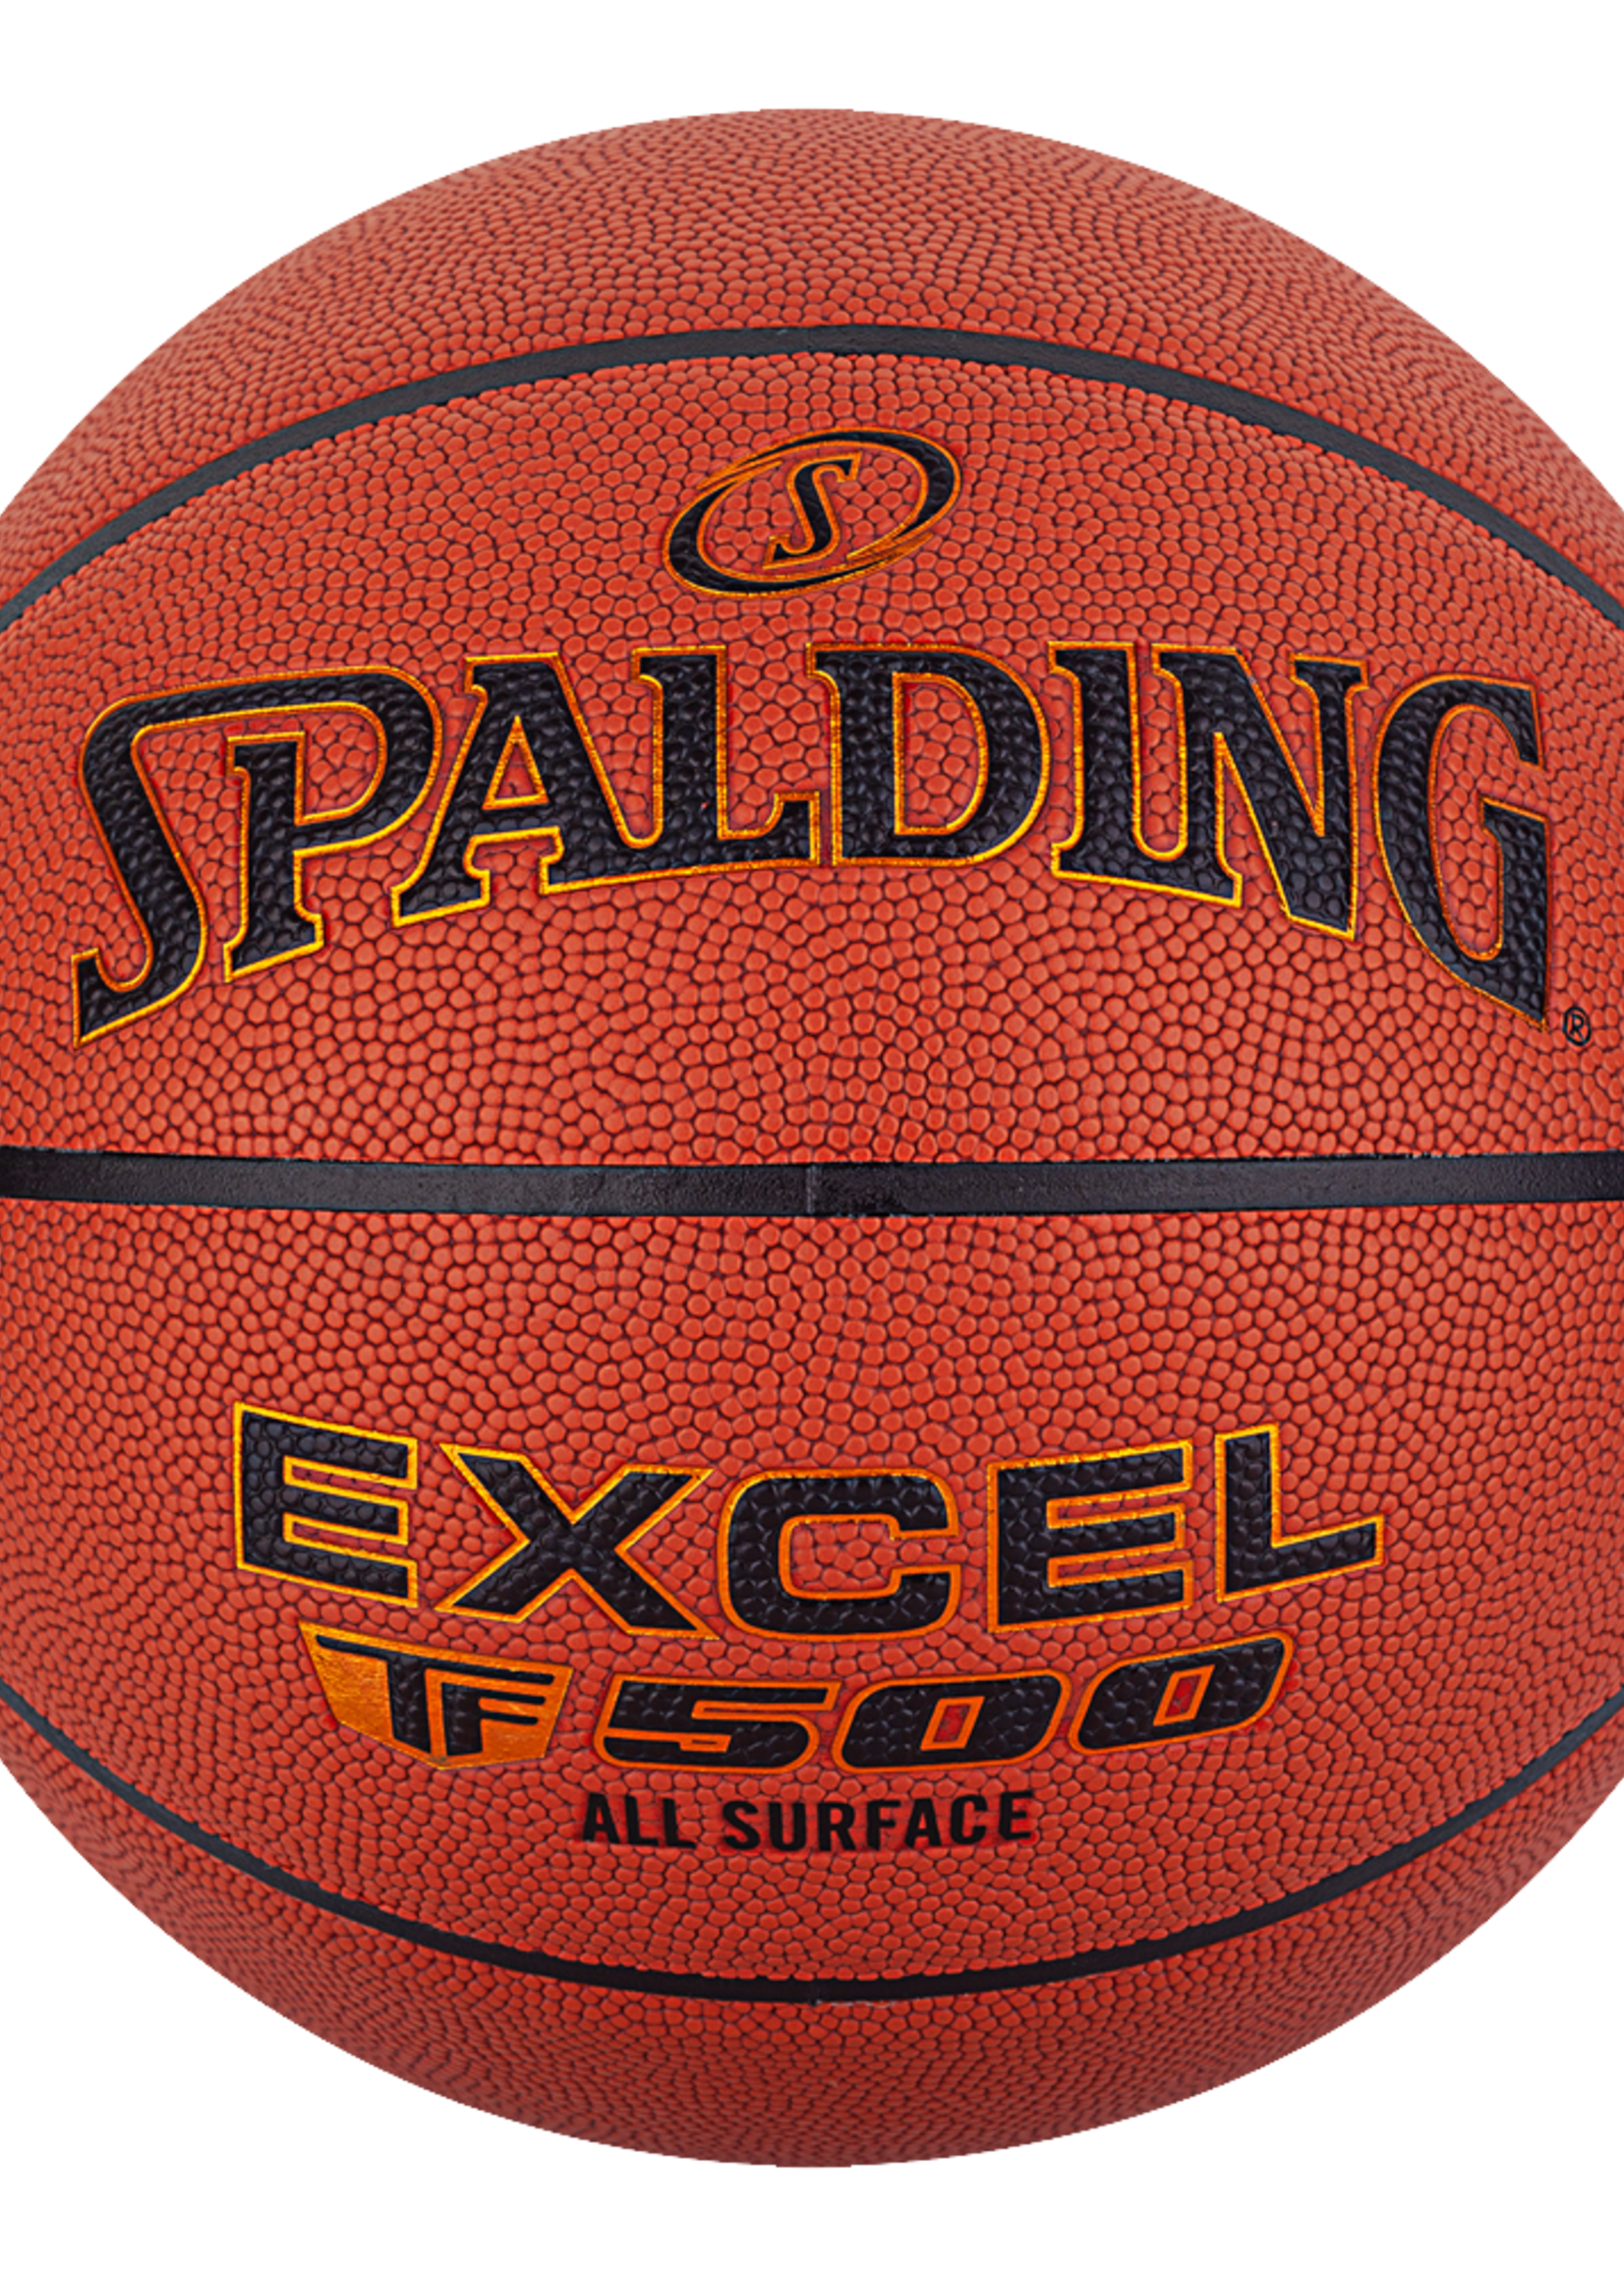 Spalding Excel TF-500 All Surface Basketball